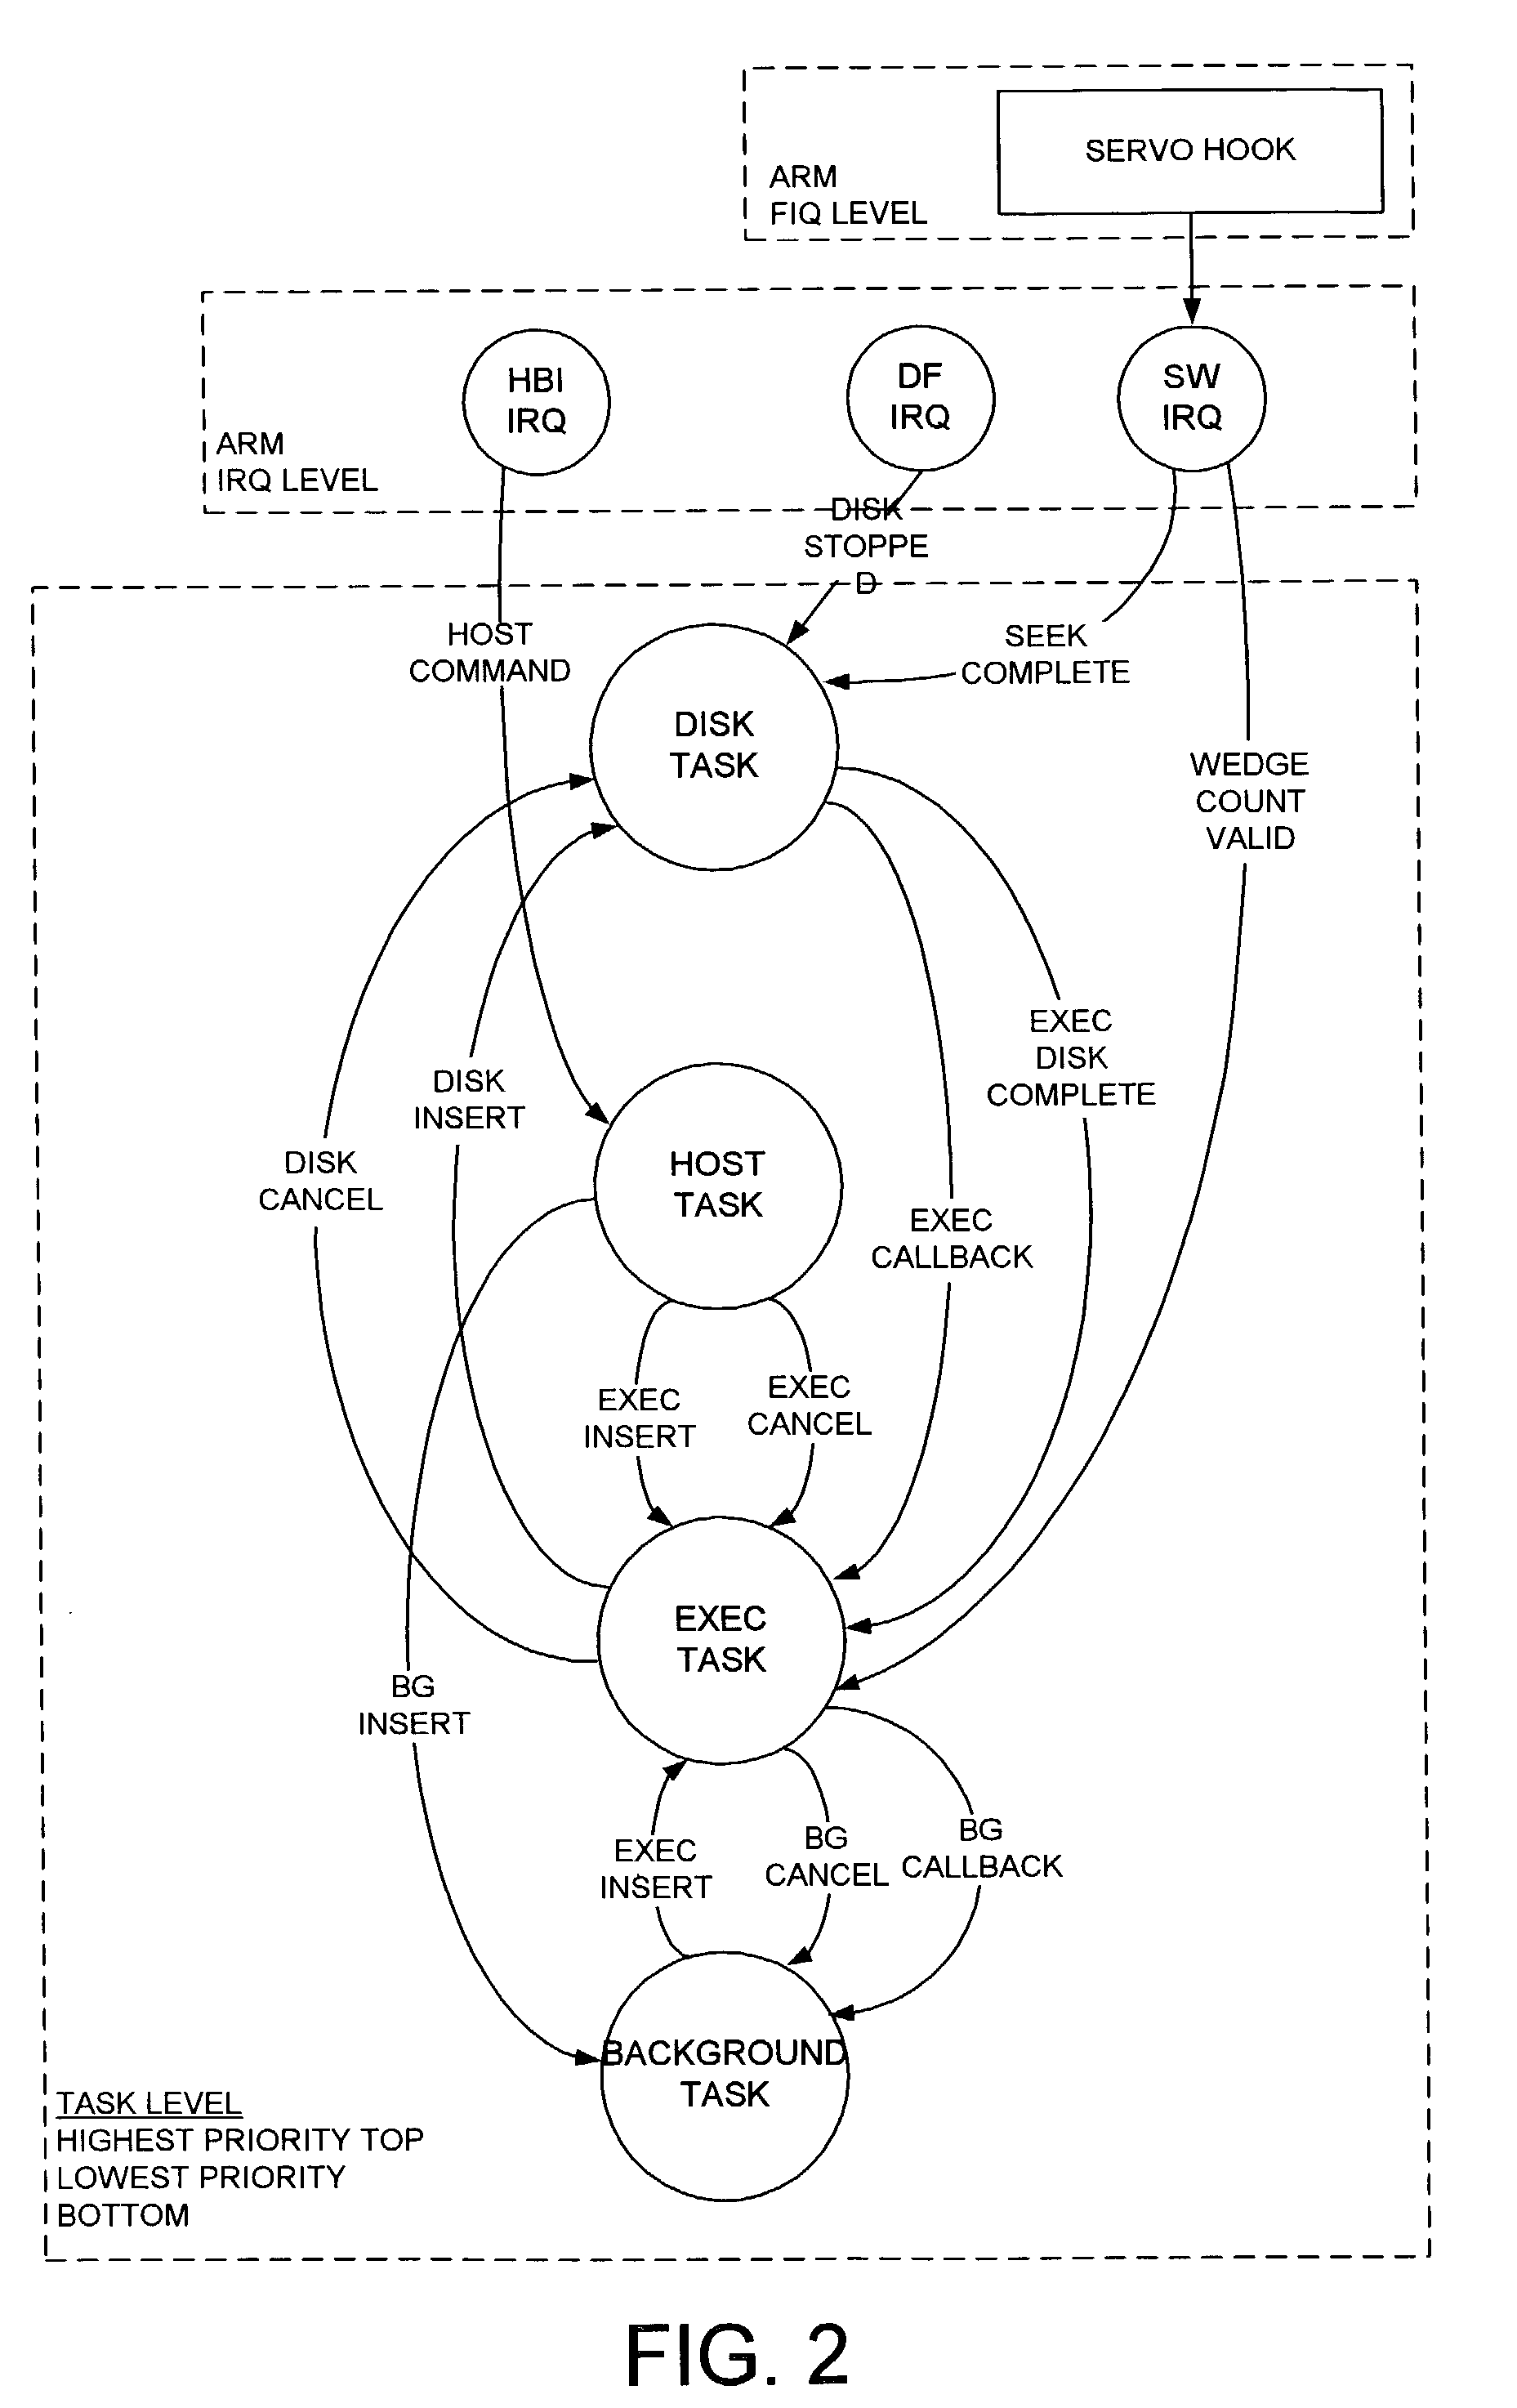 Disk drive employing a multi-phase rotational position optimization (RPO) algorithm